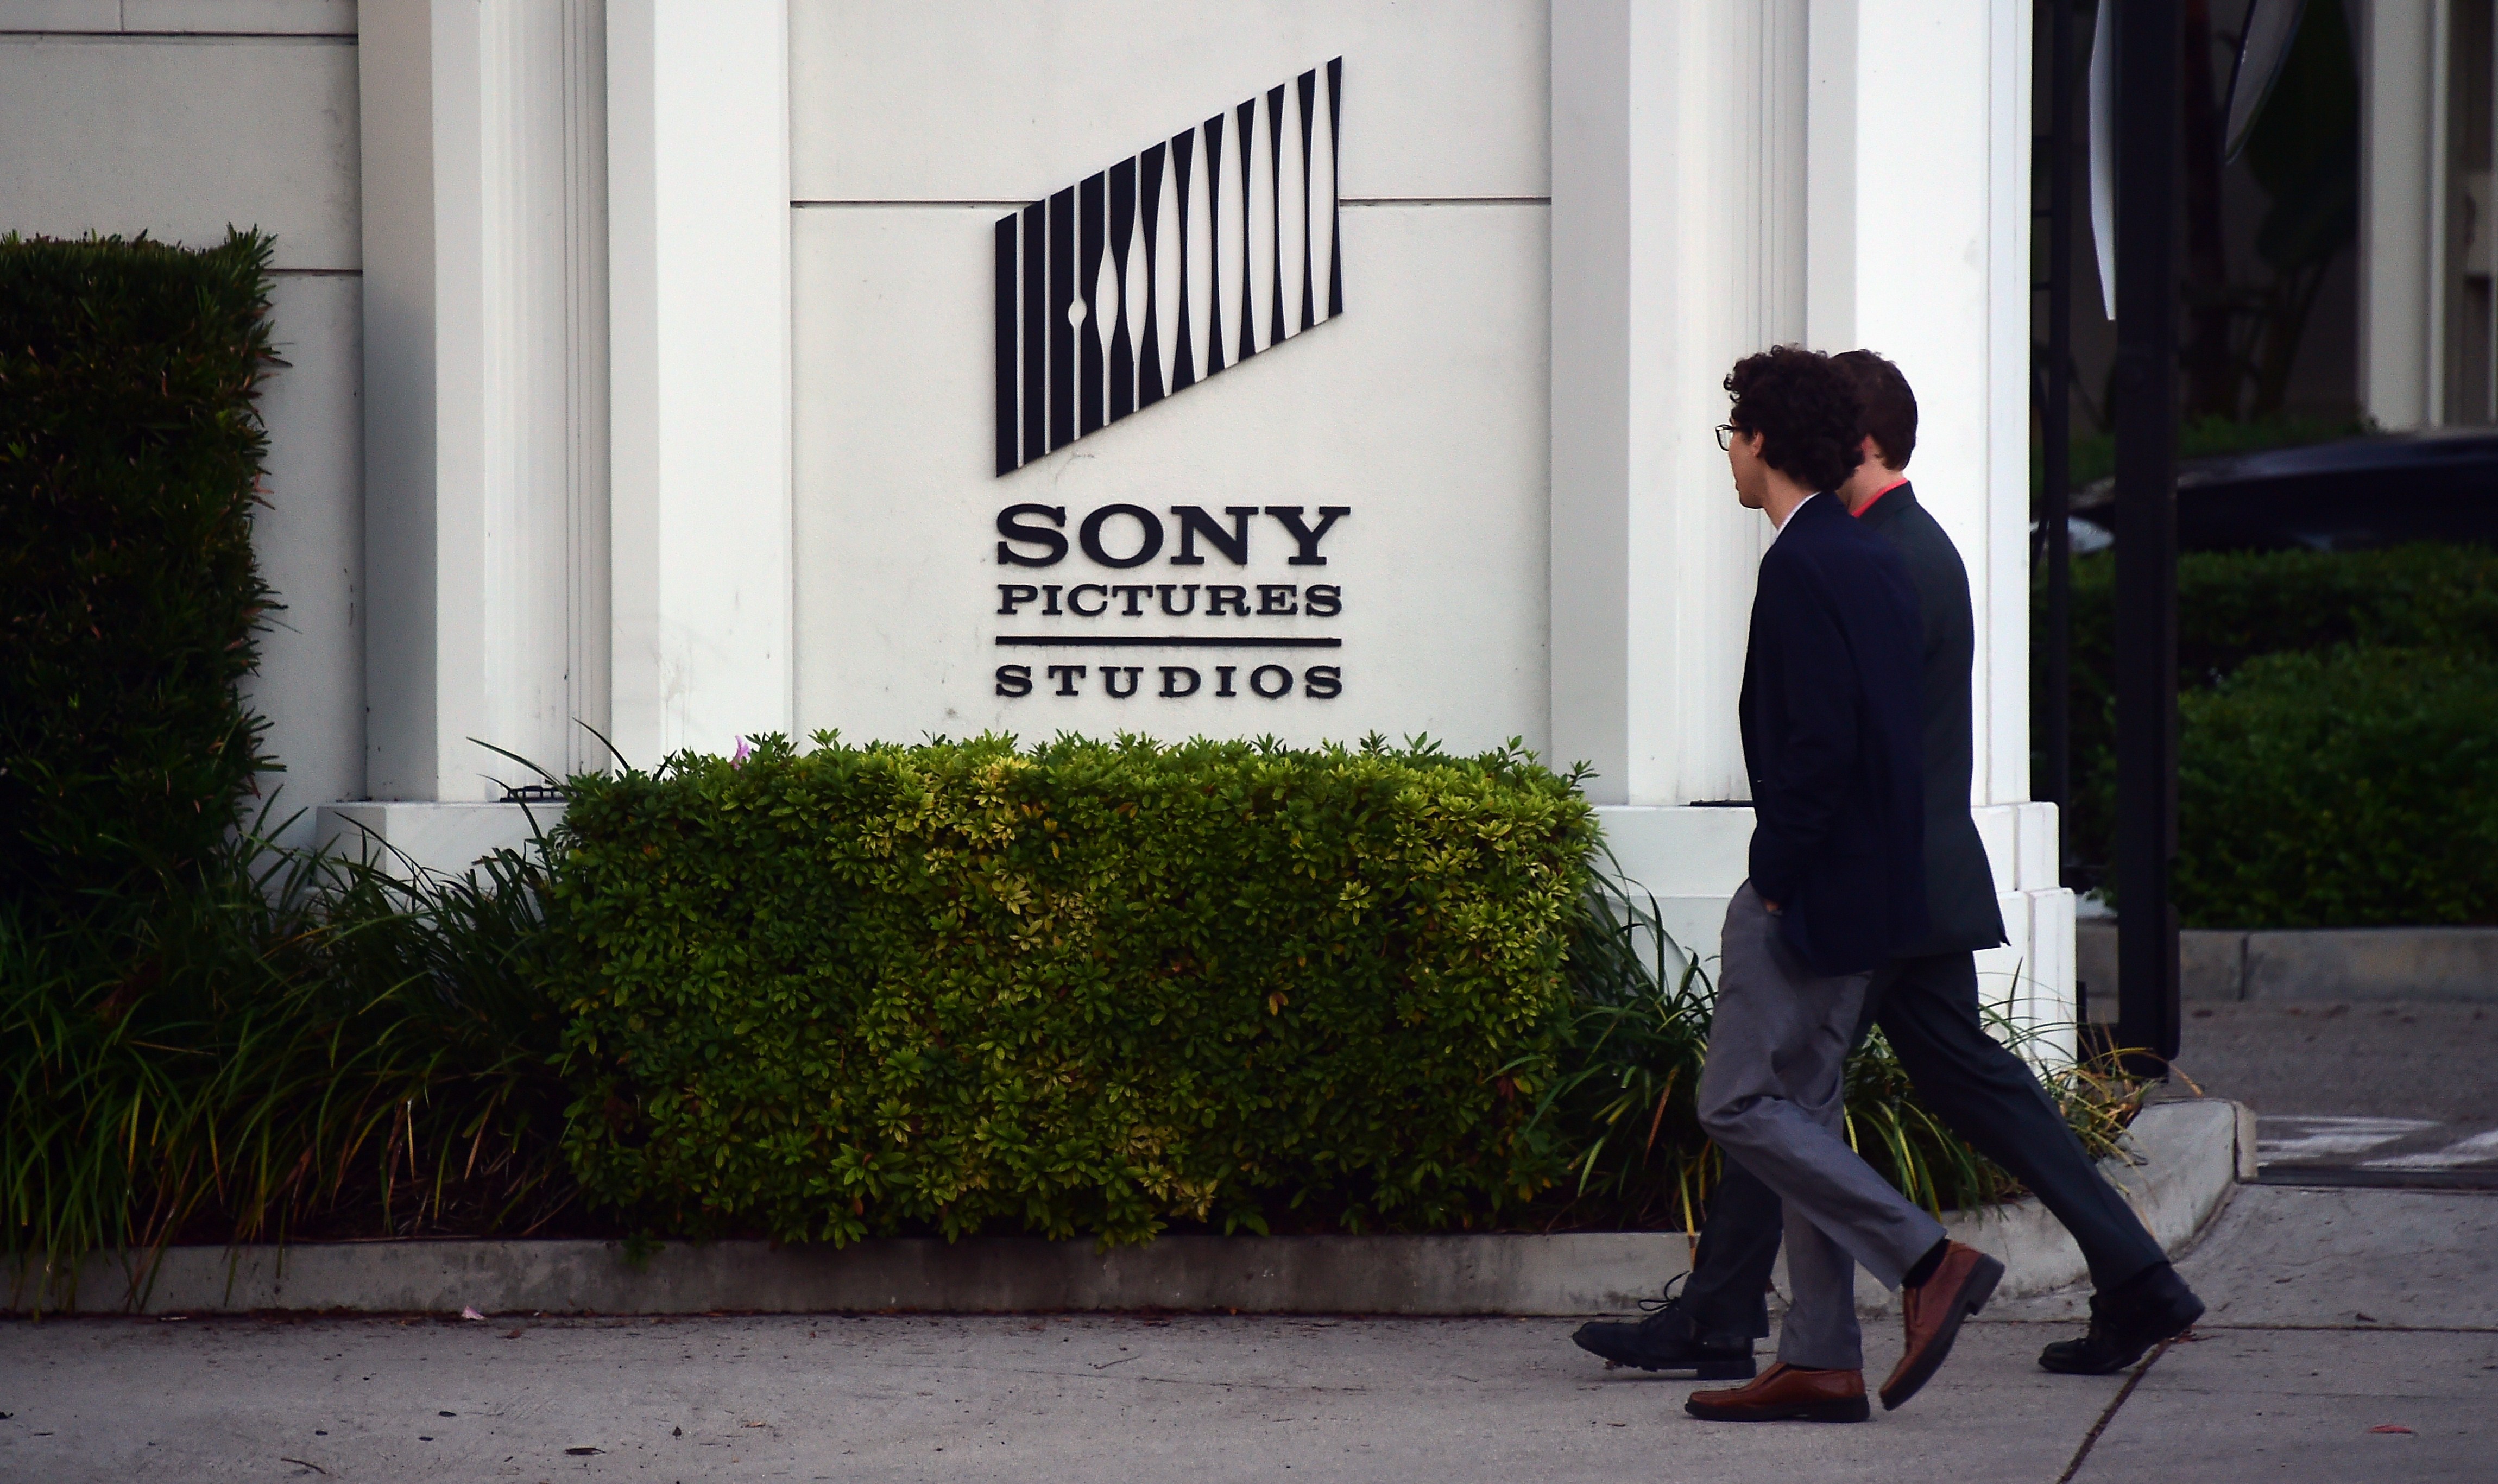 Pedestrians walk past Sony Pictures Studios in Los Angeles on Dec. 4, 2014. (Frederic J. Brown—AFP/Getty Images)